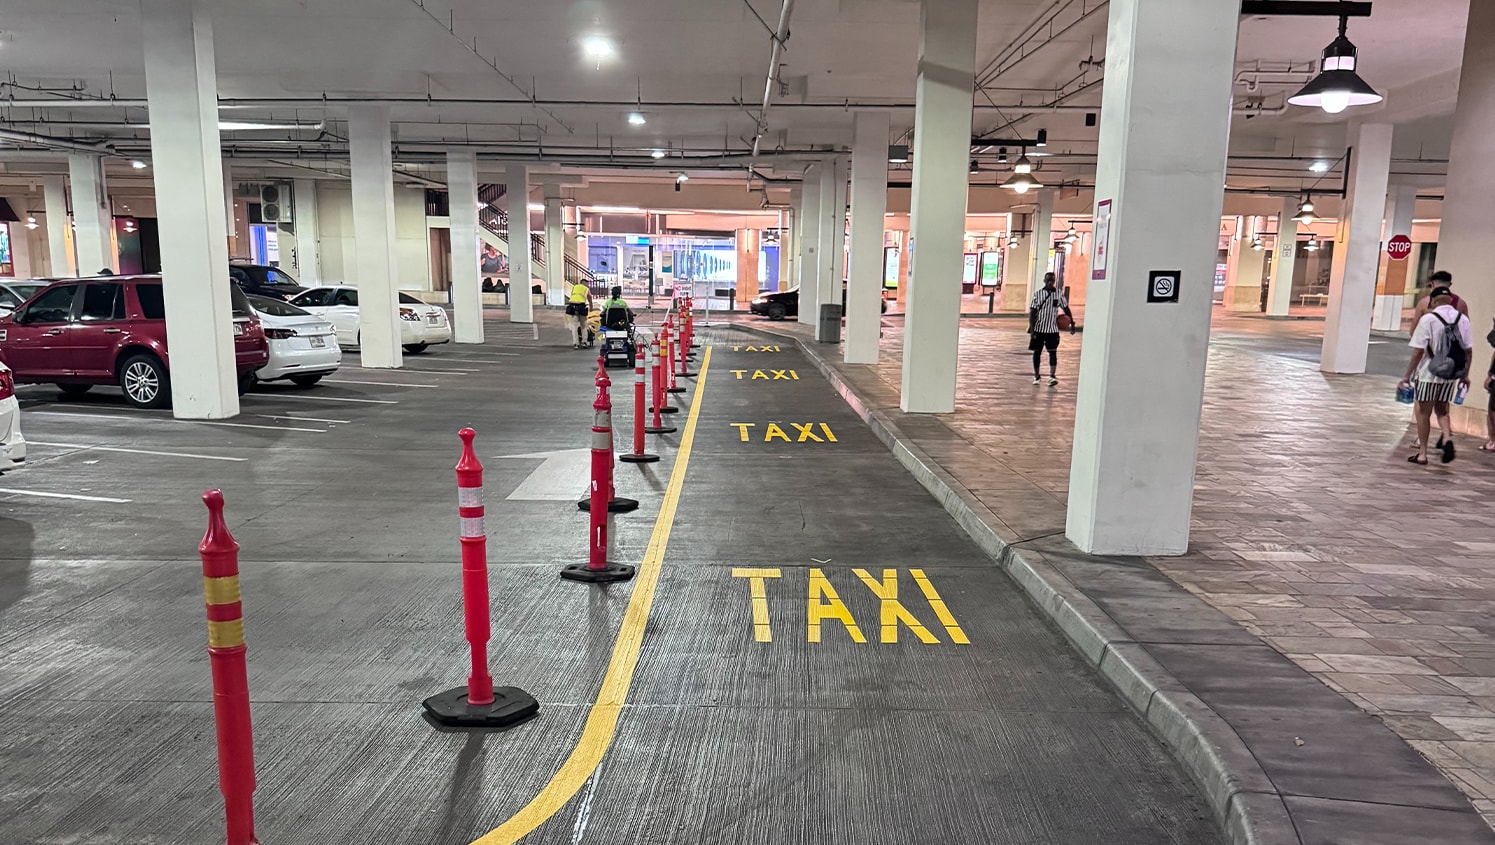 new taxi layout design for Ala Moana Shopping Center